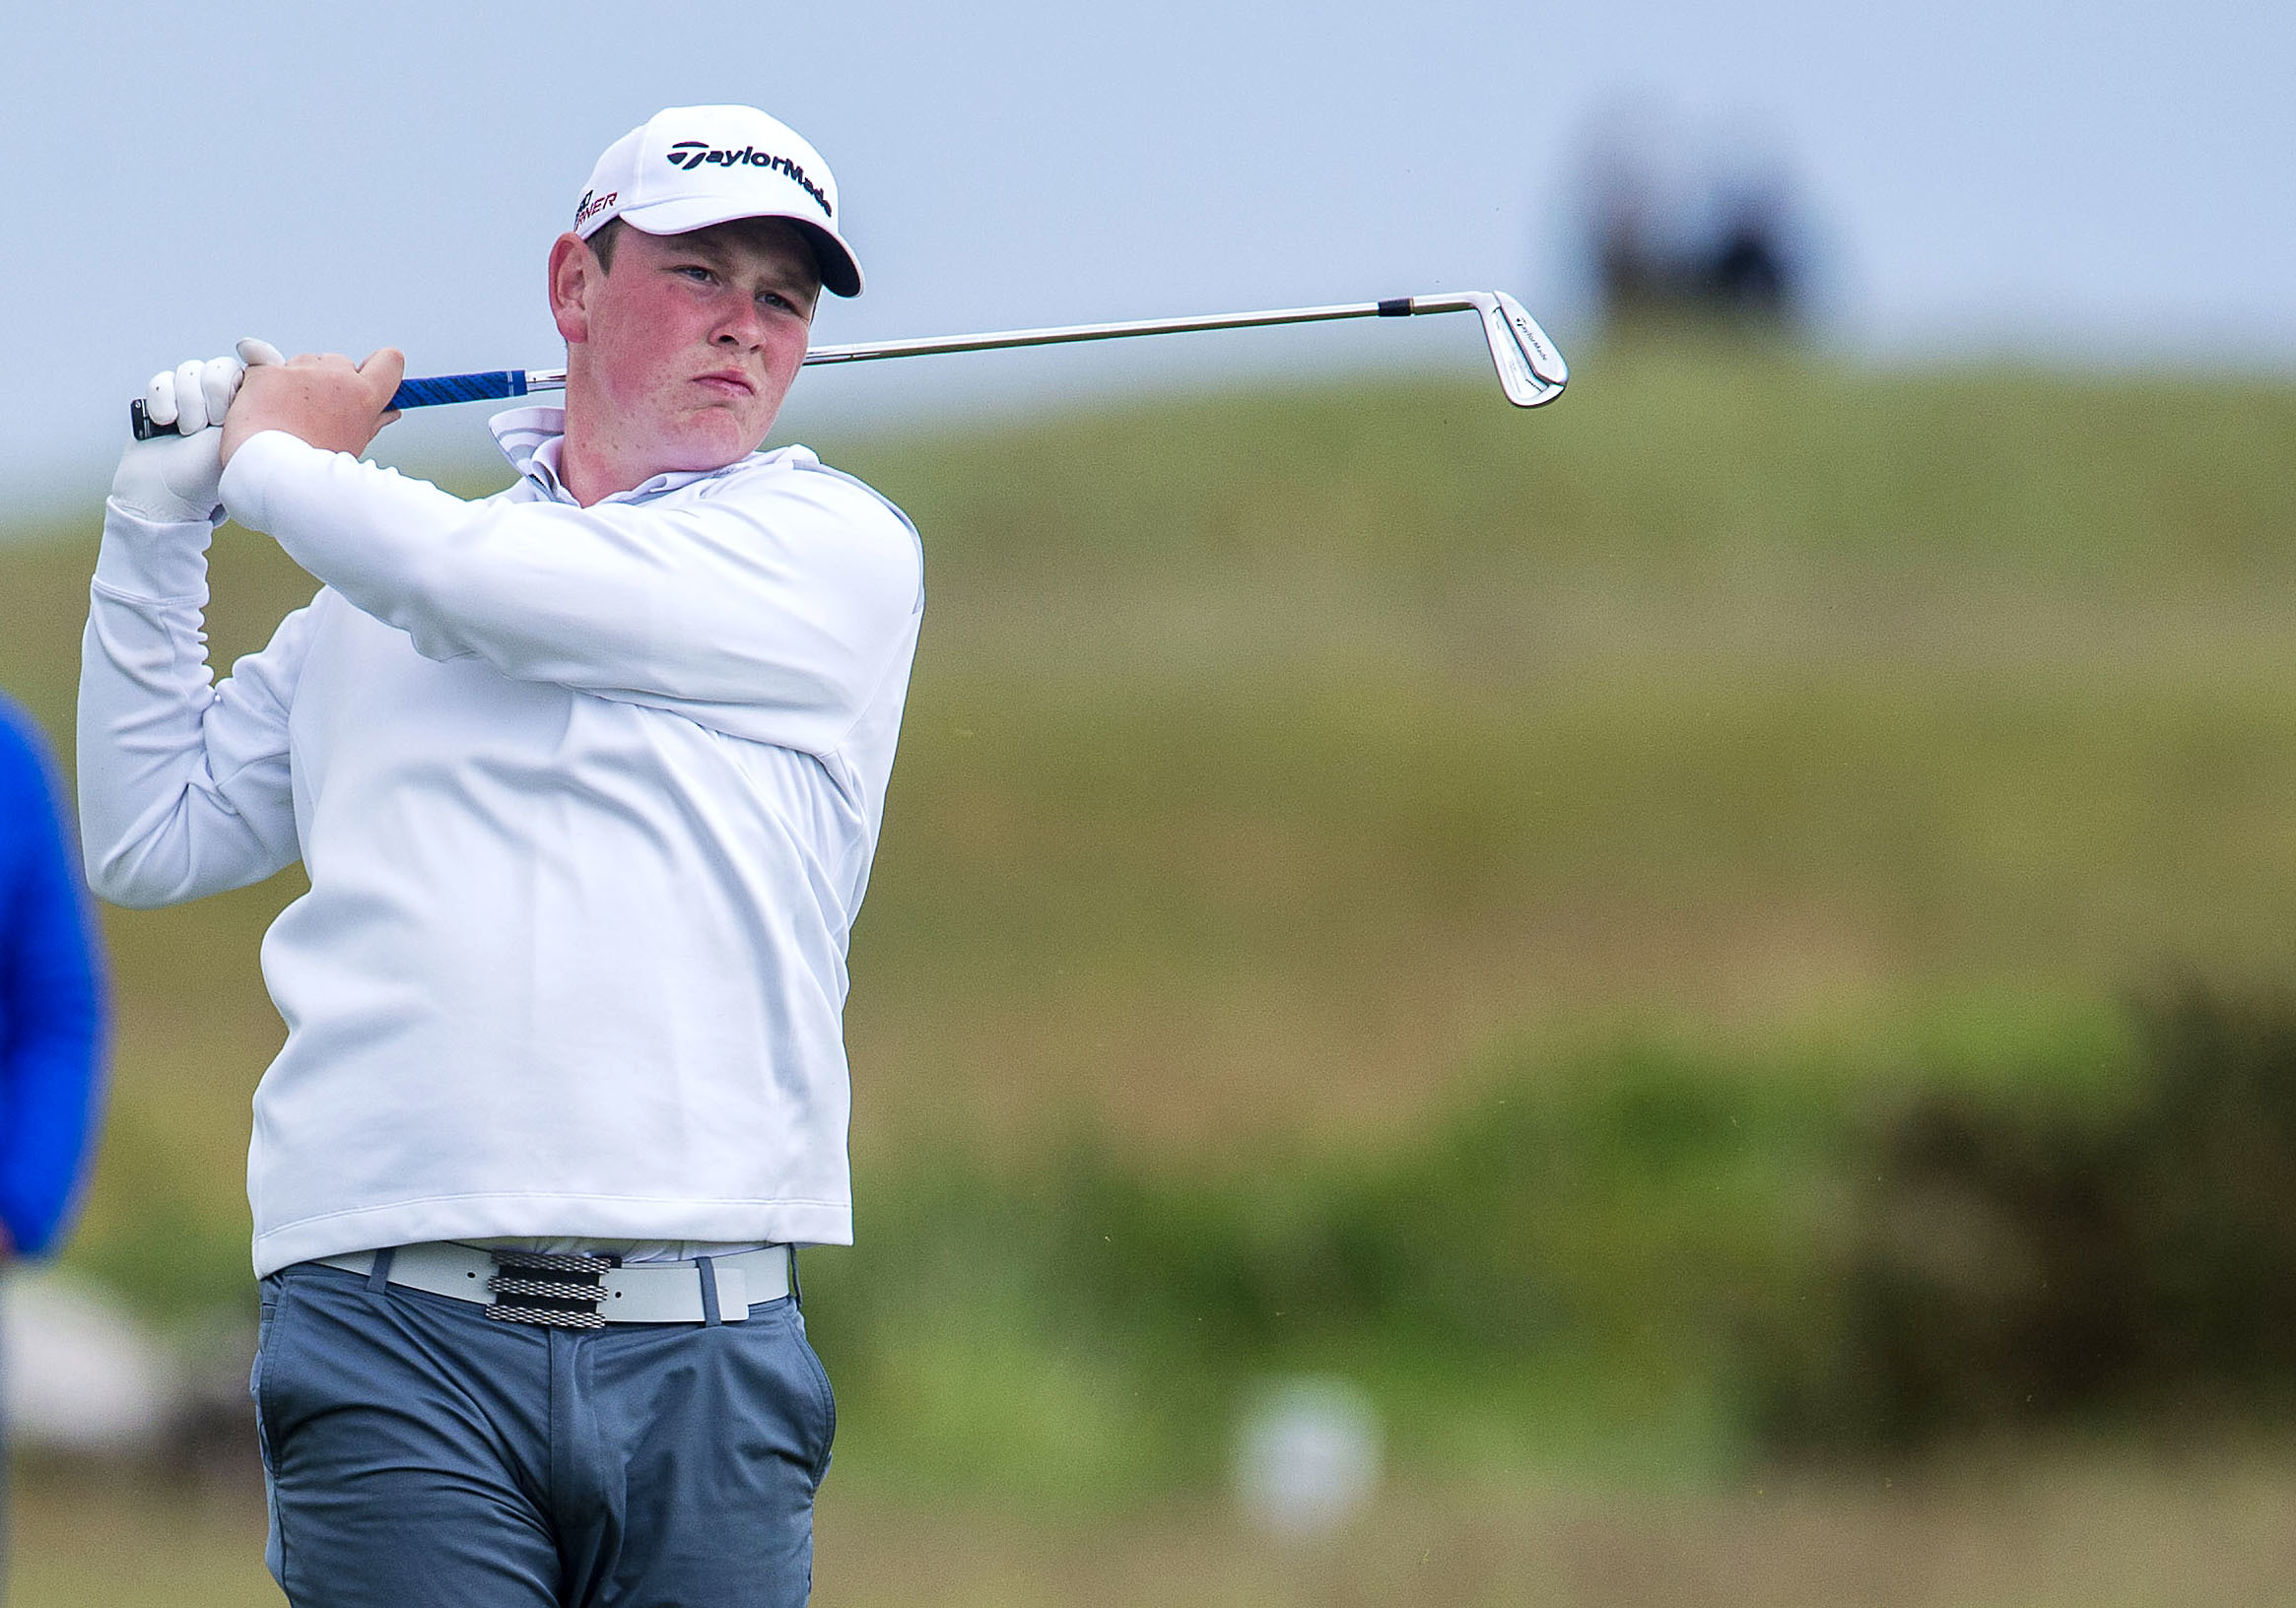 Robert MacIntyre is set to play in the US Open for the first time.